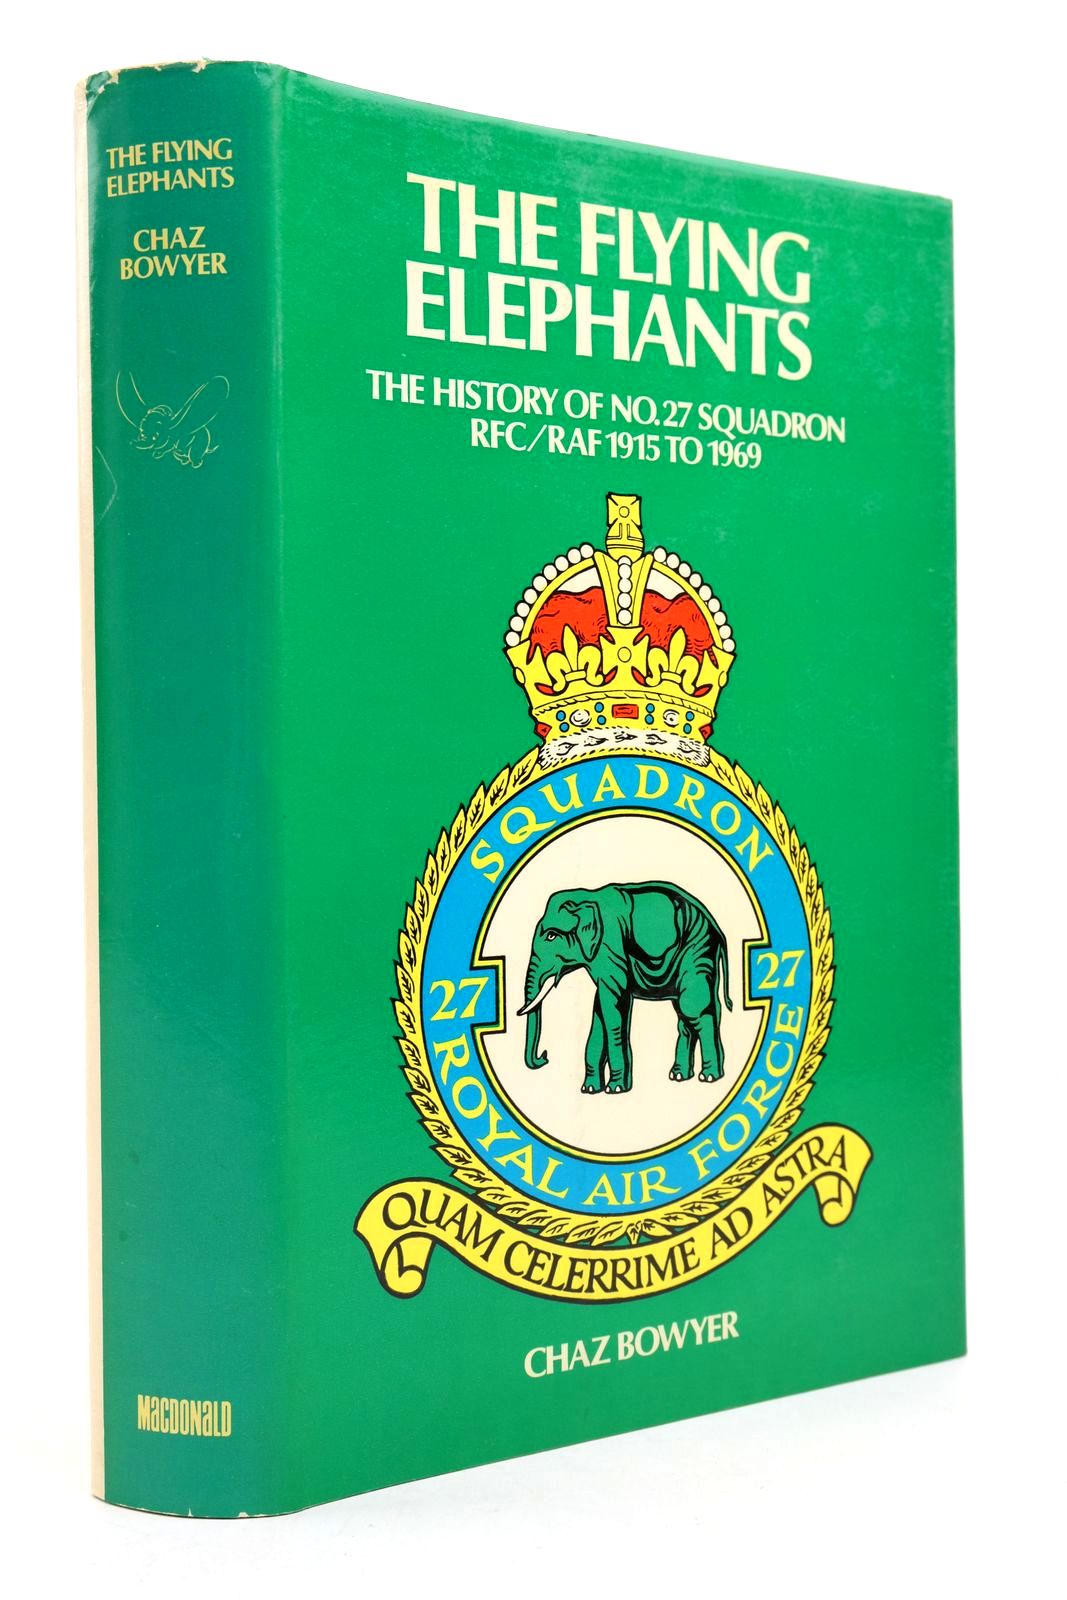 Photo of THE FLYING ELEPHANTS written by Bowyer, Chaz published by MacDonald (STOCK CODE: 2139799)  for sale by Stella & Rose's Books